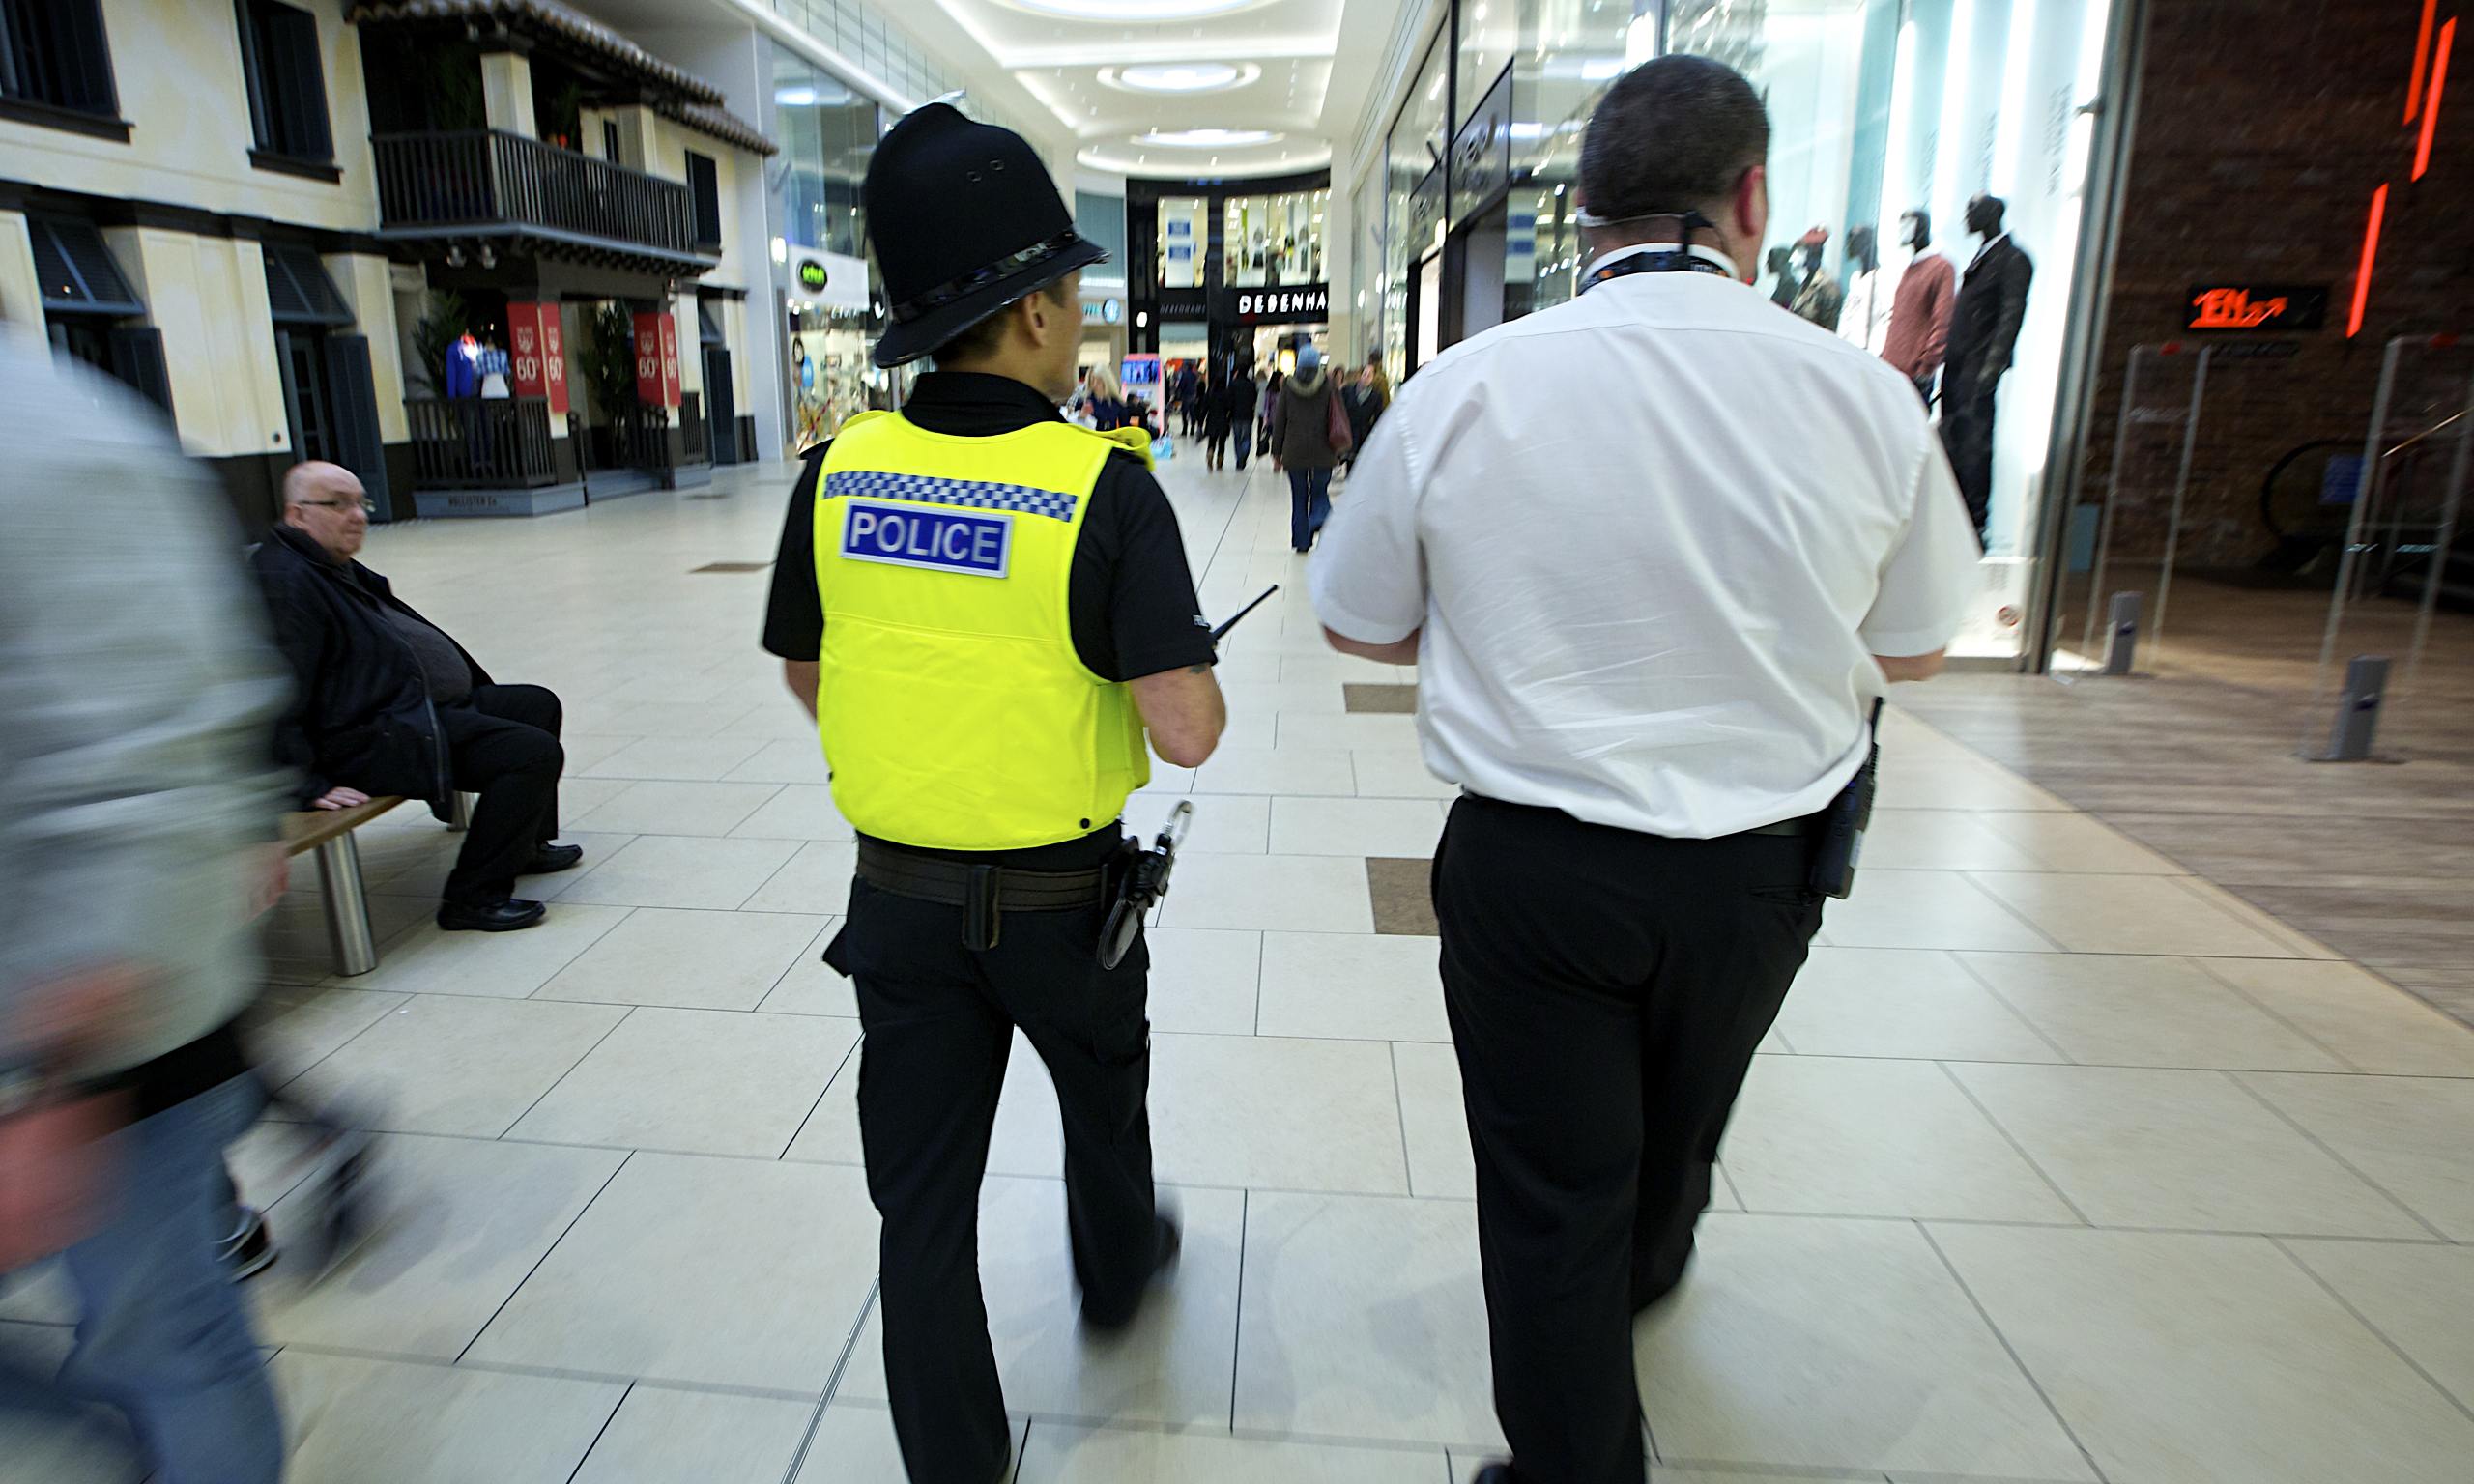 Shoplifting On The Increase As Overall Crime Figures Fall Uk News 